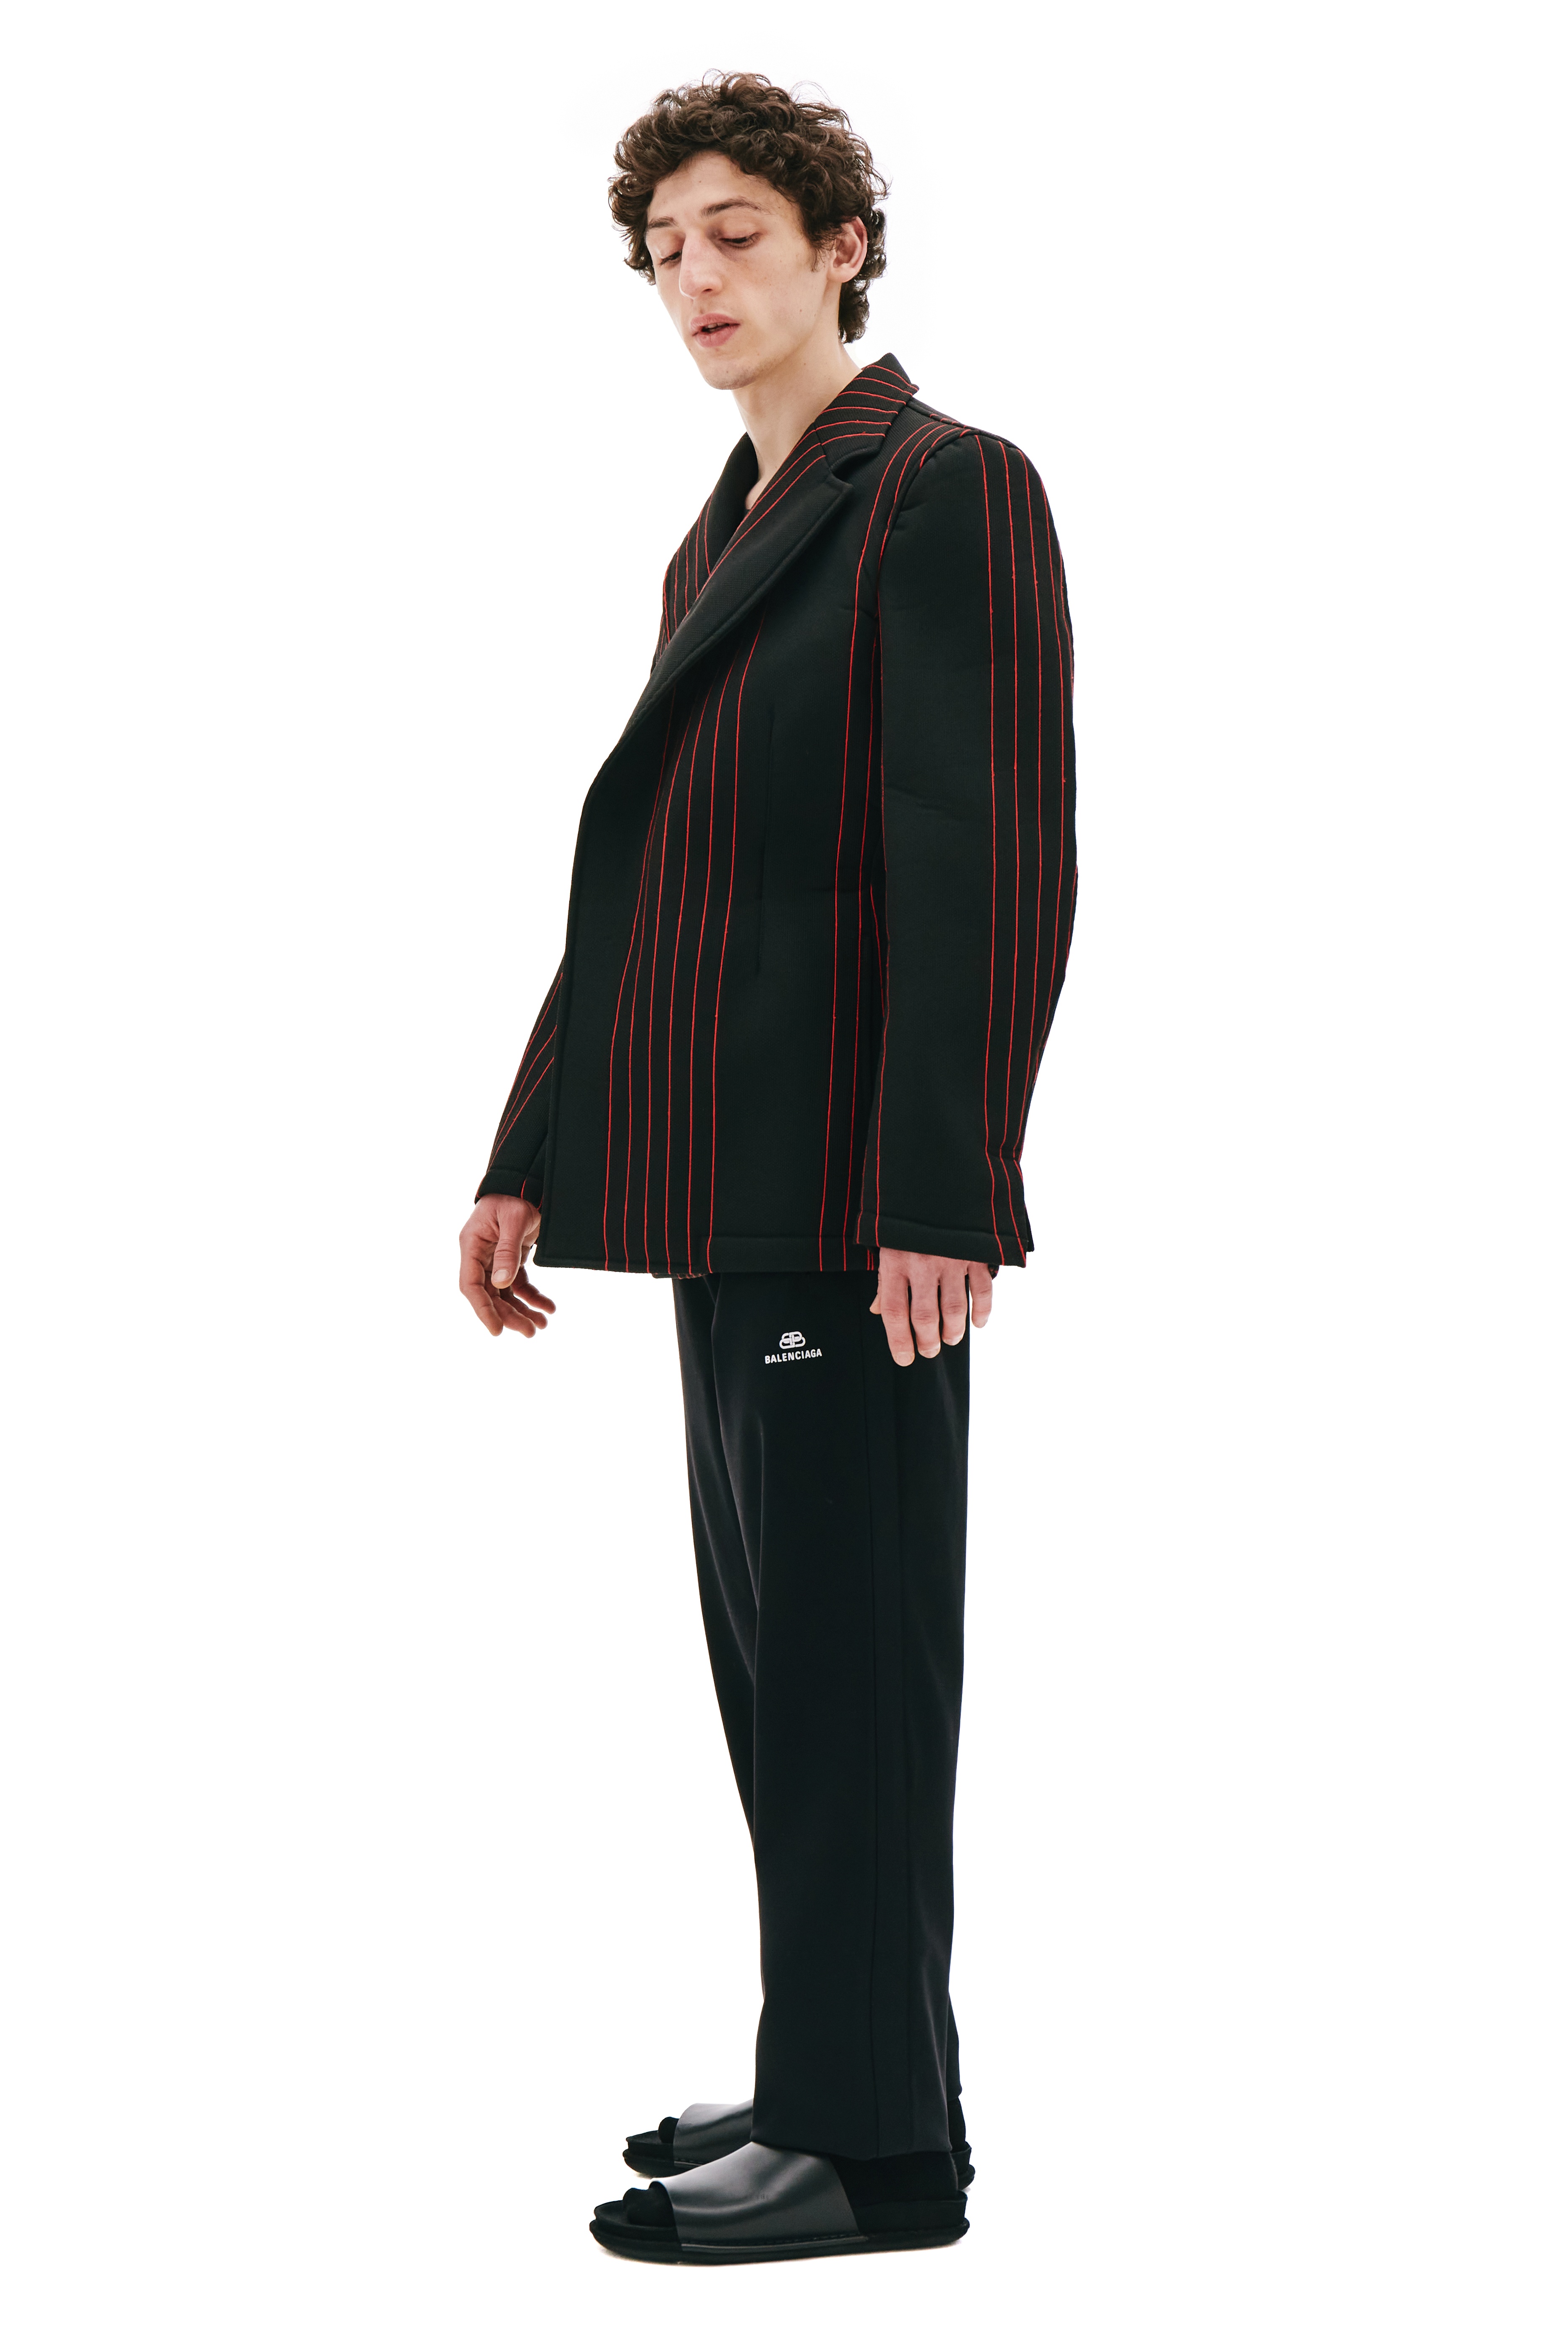 BLACK JACKET WITH RED STRIPES - 4